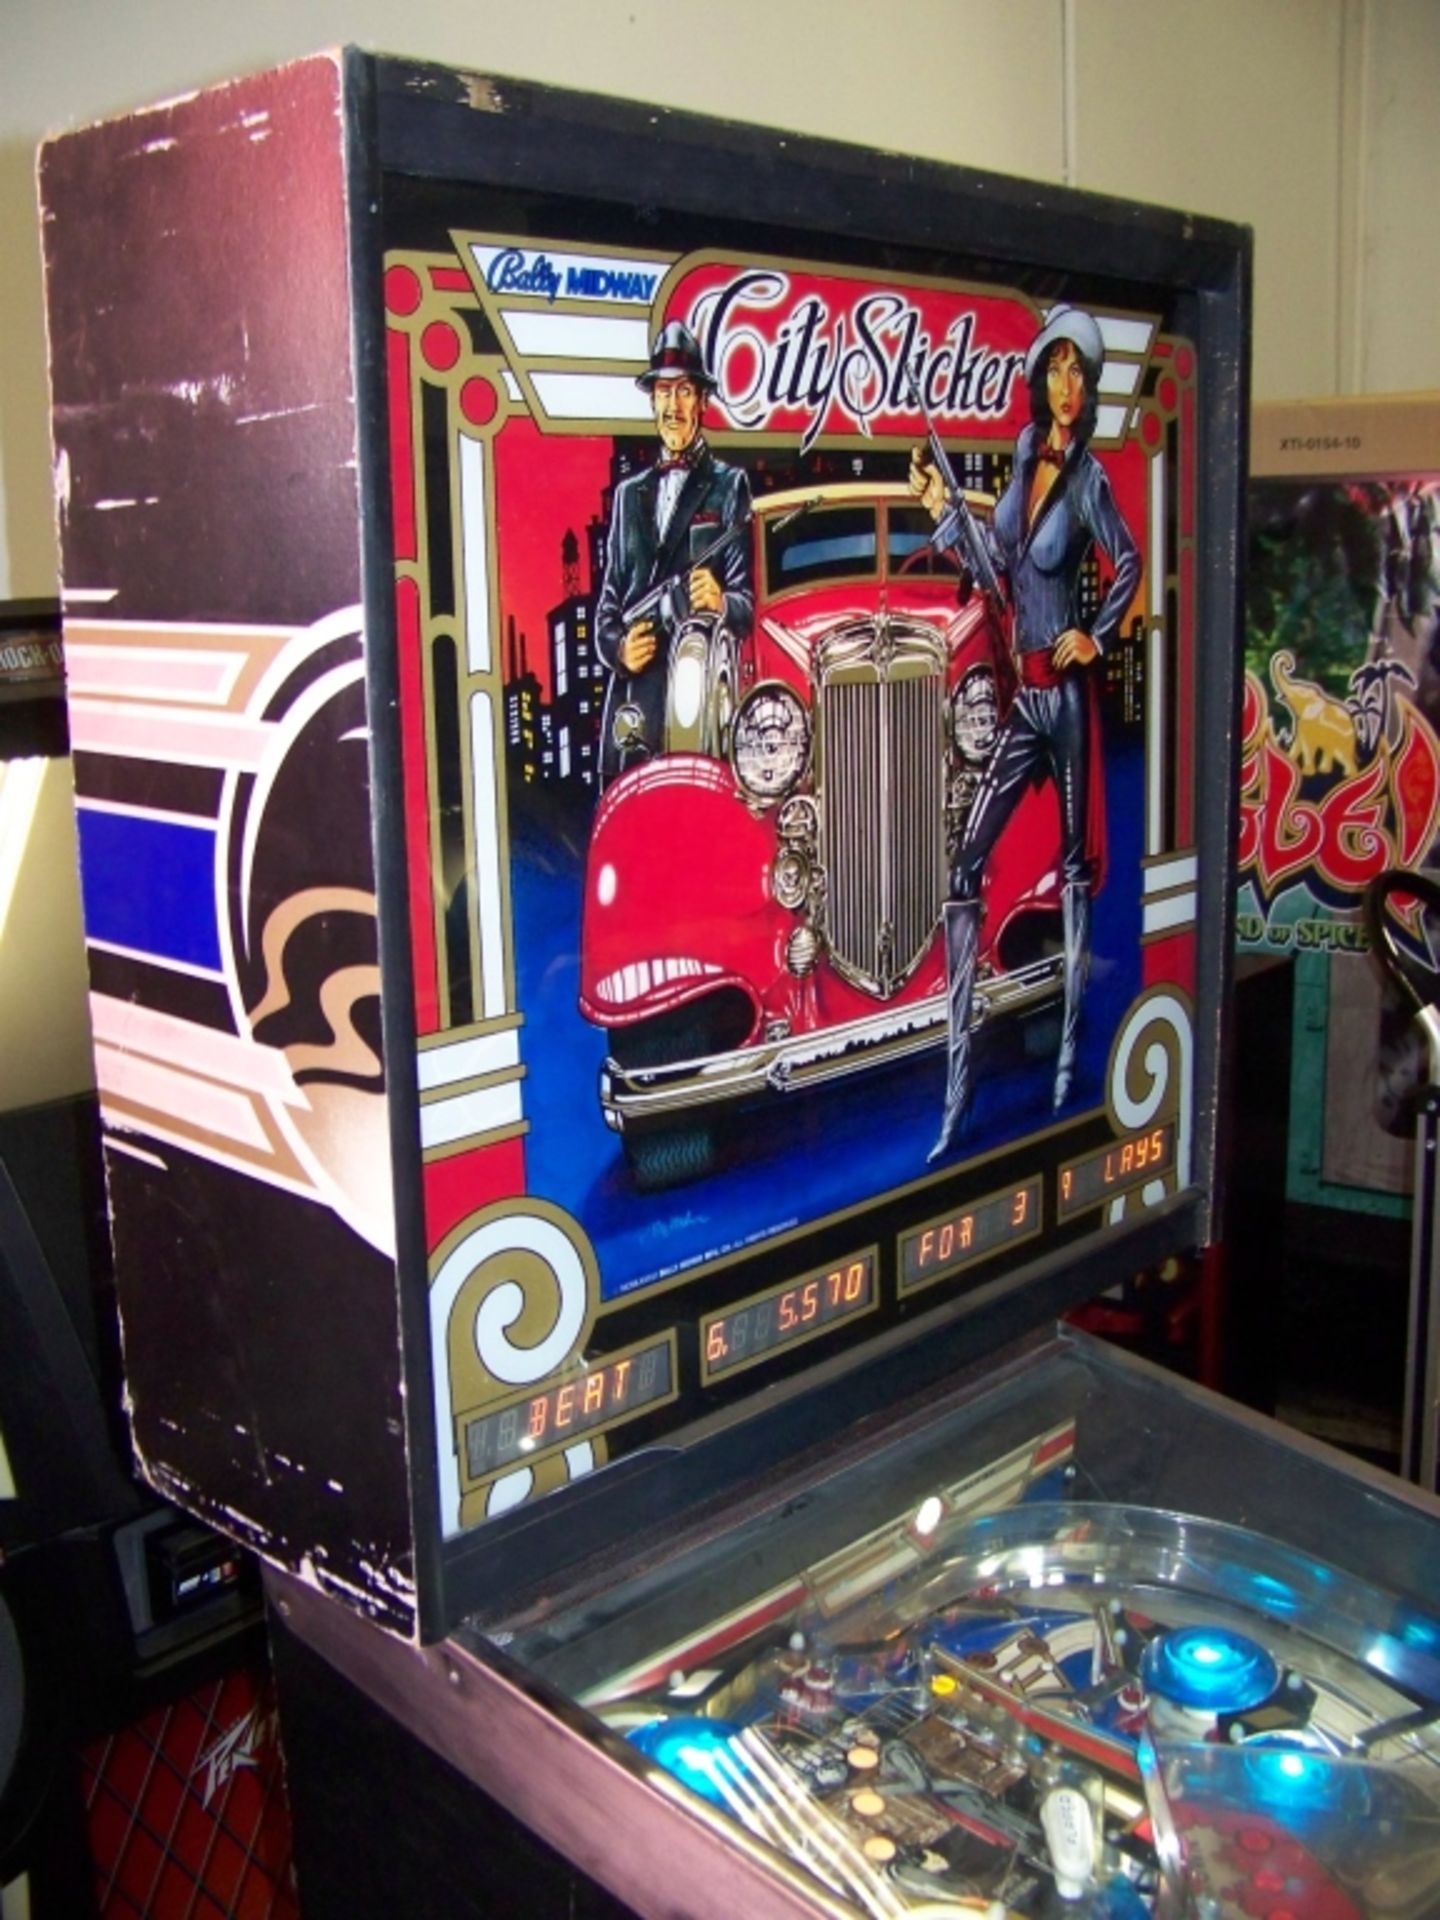 CITY SLICKER PINBALL MACHINE BALLY 1987 RARE! Item is in used condition. Evidence of wear and - Image 5 of 9